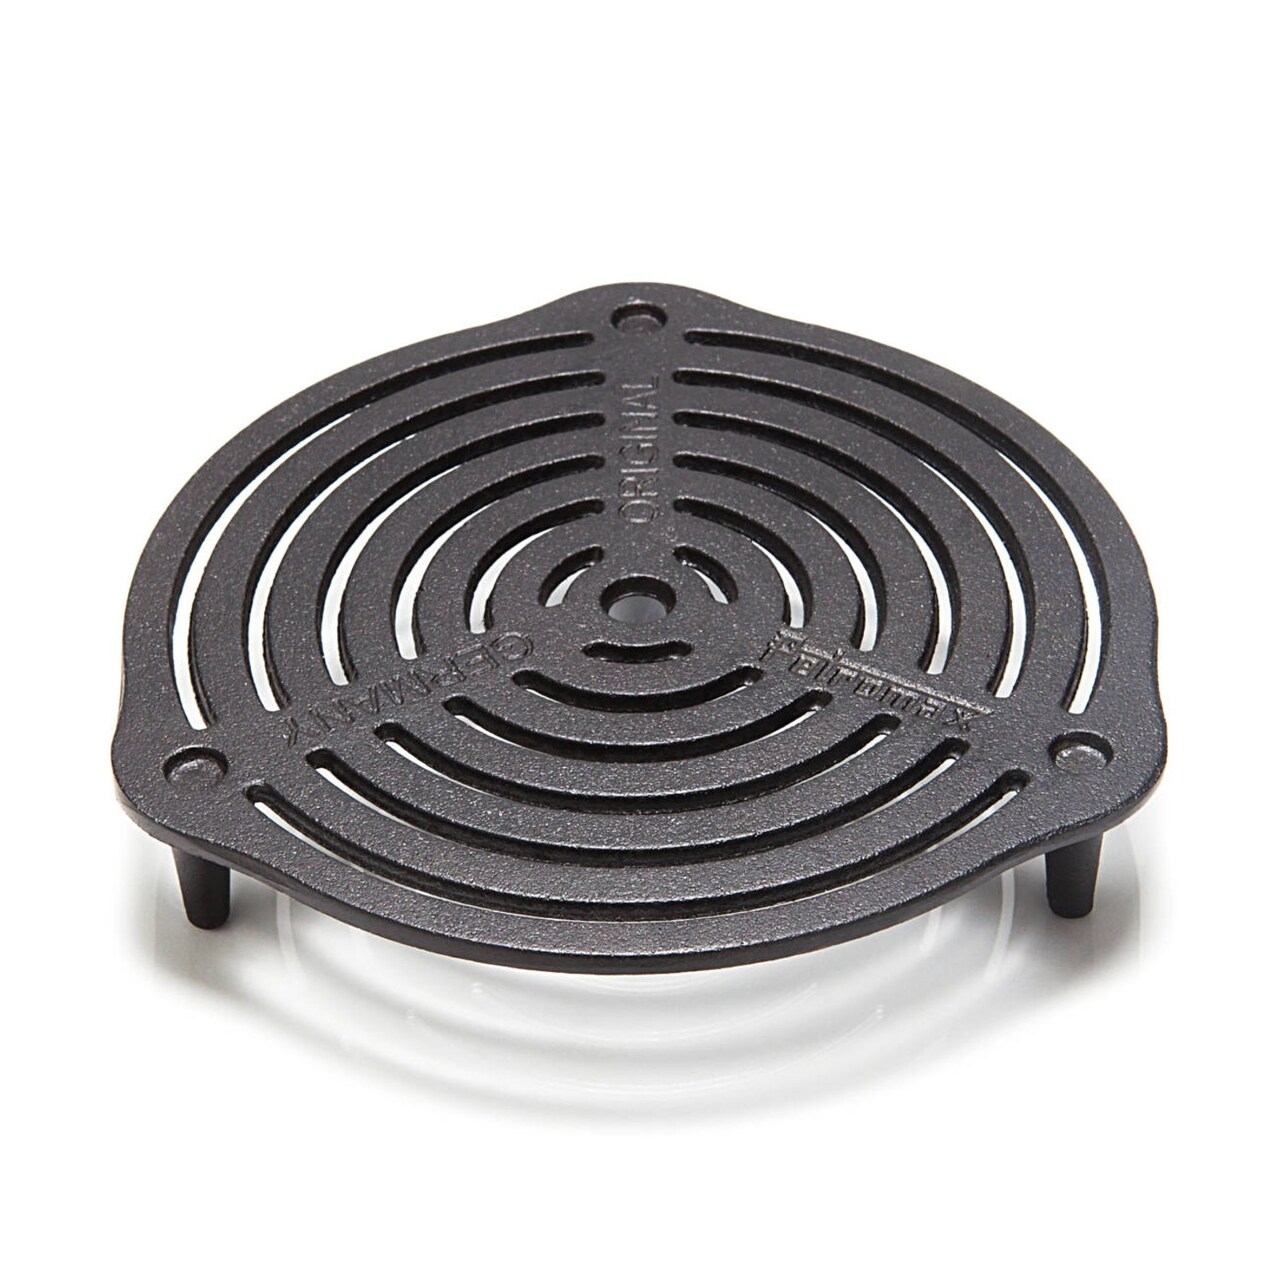 Petromax Cast Iron Stack Grate for Dutch Ovens, Prevent Bottom Burning and  Evenly Distribute Heat, Can Also Place Directly in the Campfire or on the  Table as a Trivet